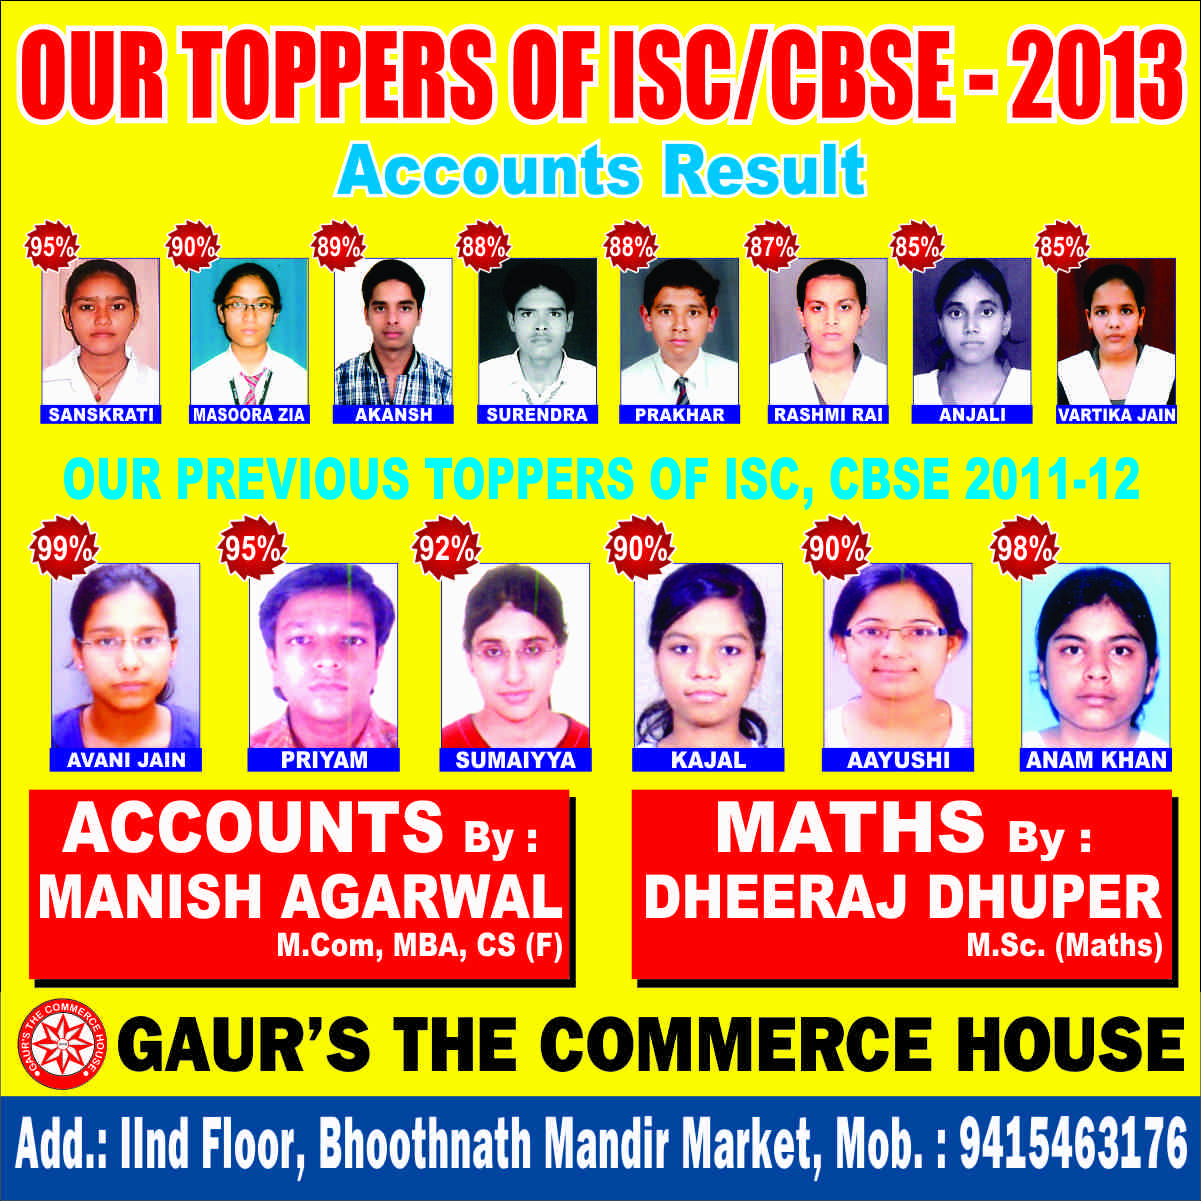 Our Toppers of ISC/CBSE 2013